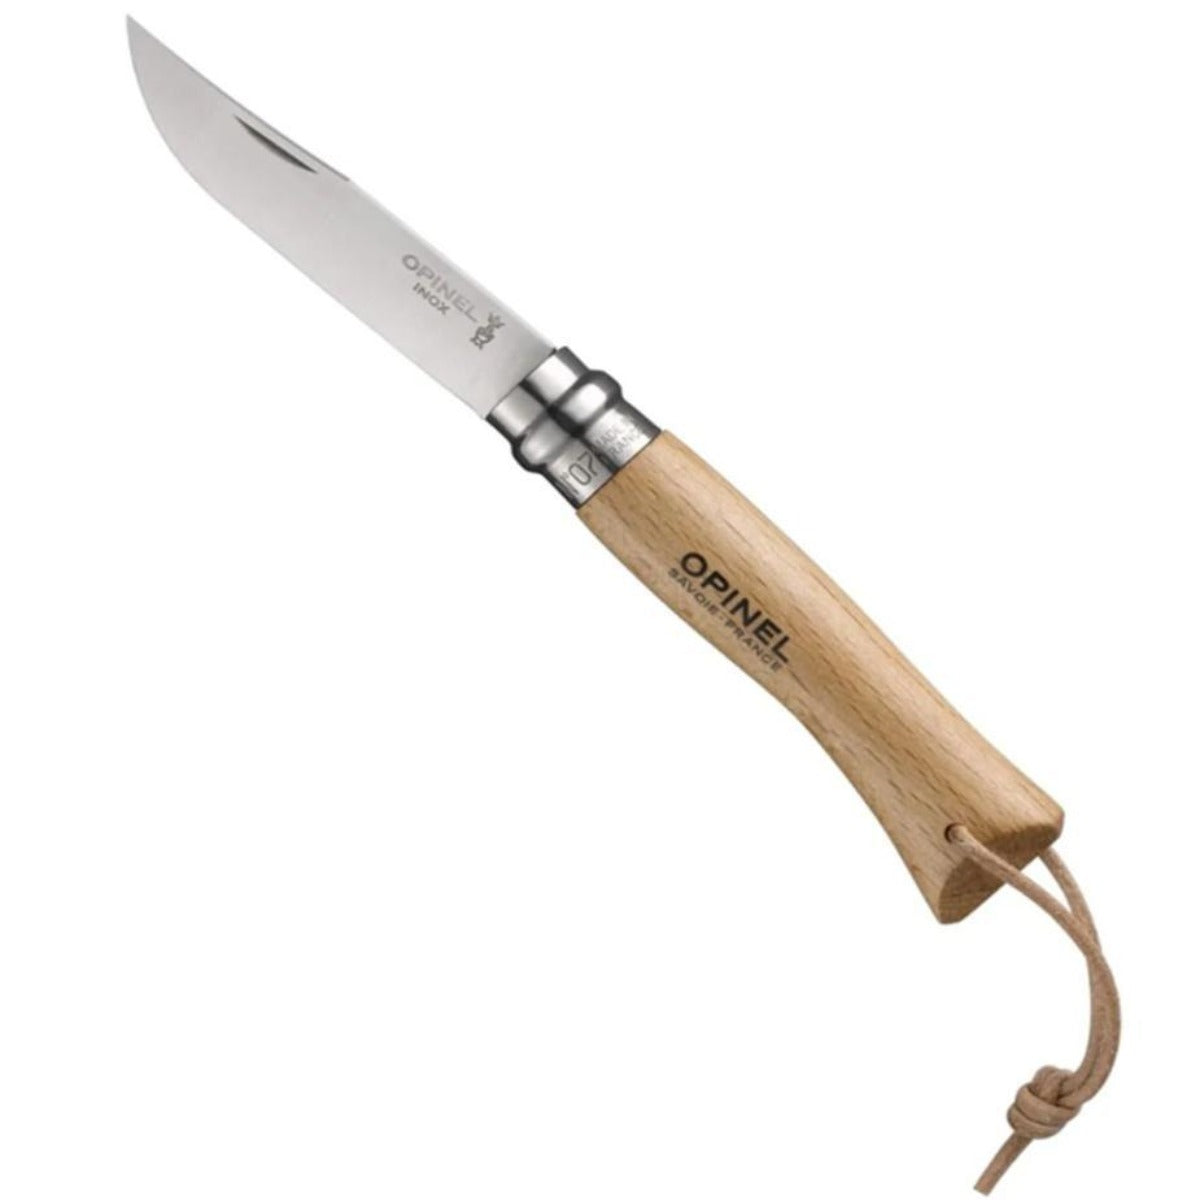 Opinel - No.07 Stainless Steel Pocket Knife with Lanyard - Space Camp